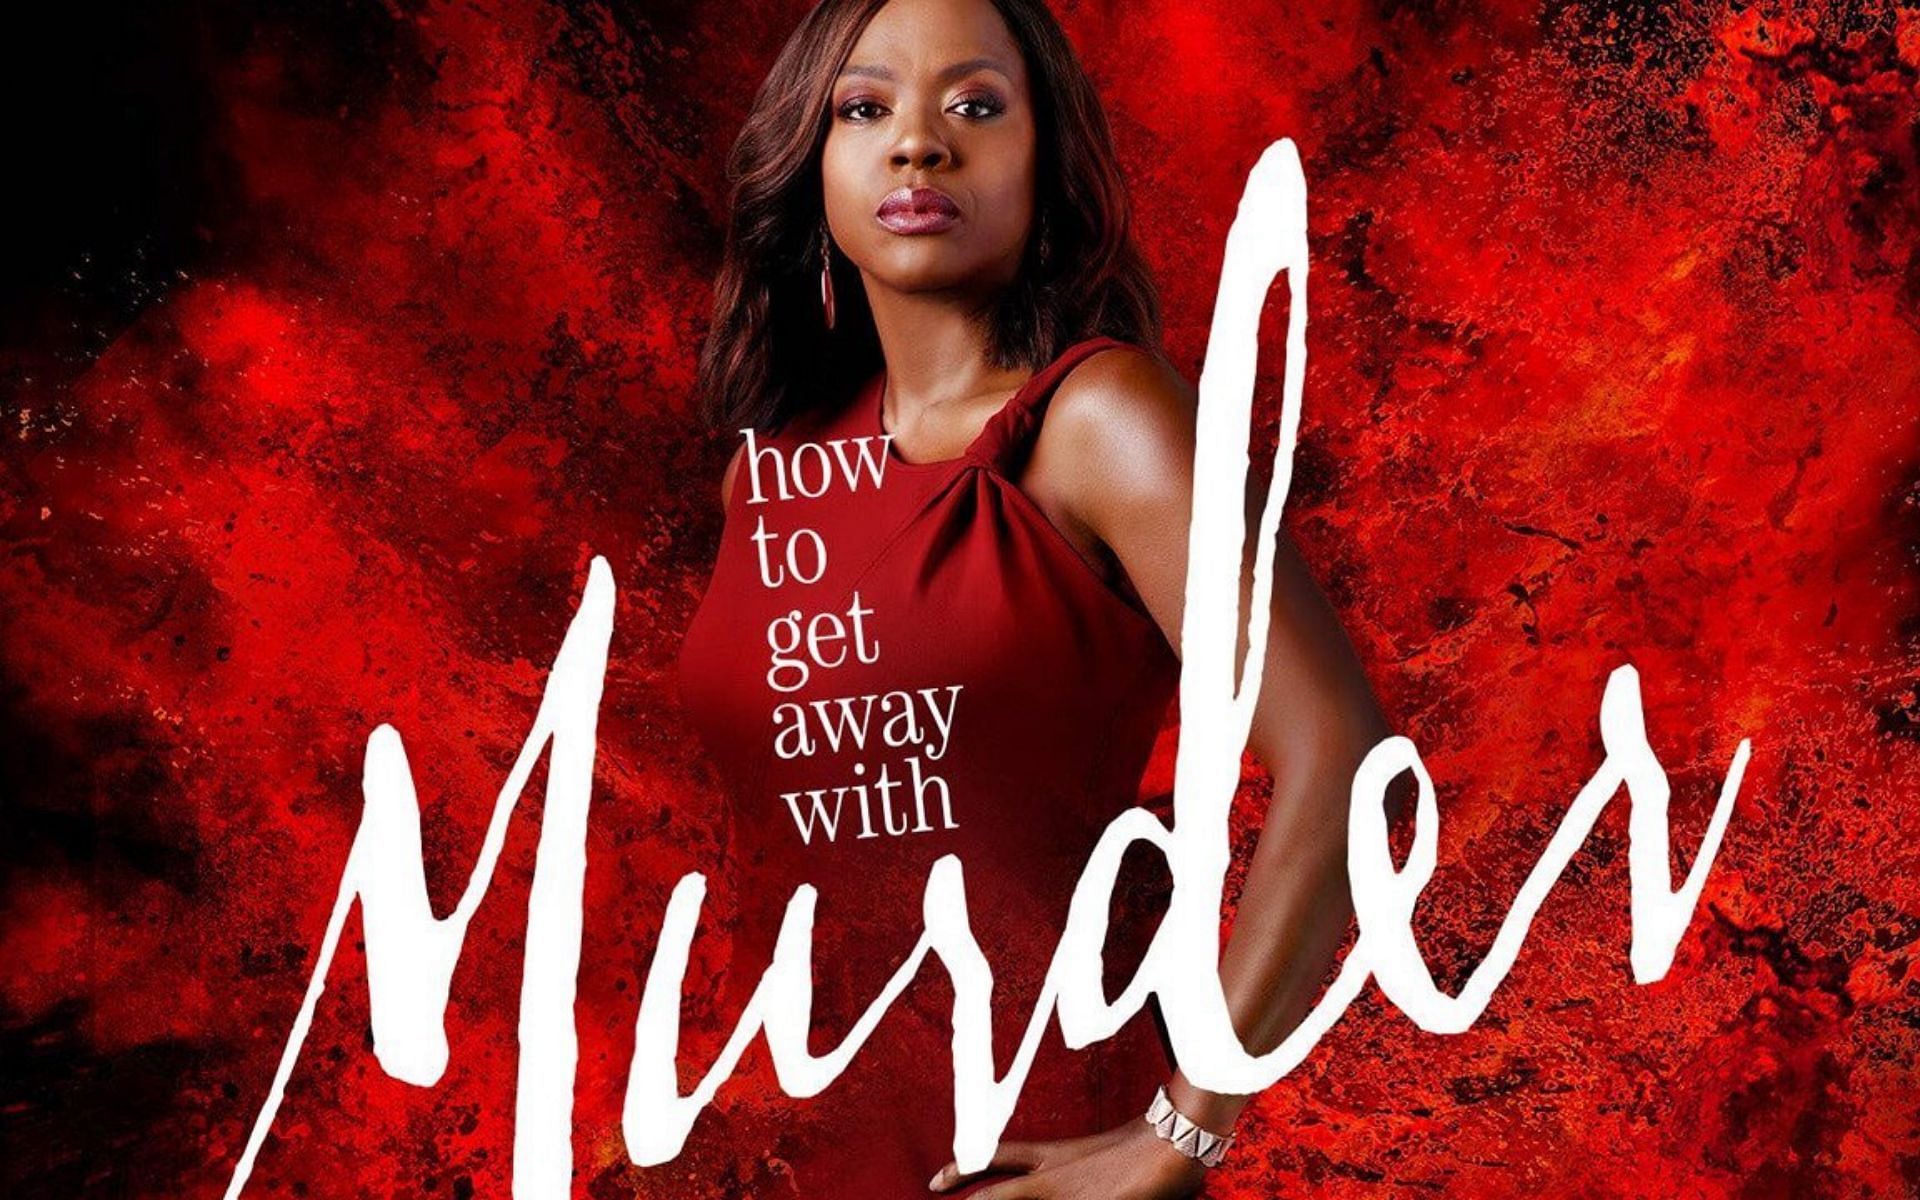 ABC&#039;s How to Get Away with Murder starring Viola Davis as Annalise Keating (Image via @LetZoeSpoilYou/Twitter)